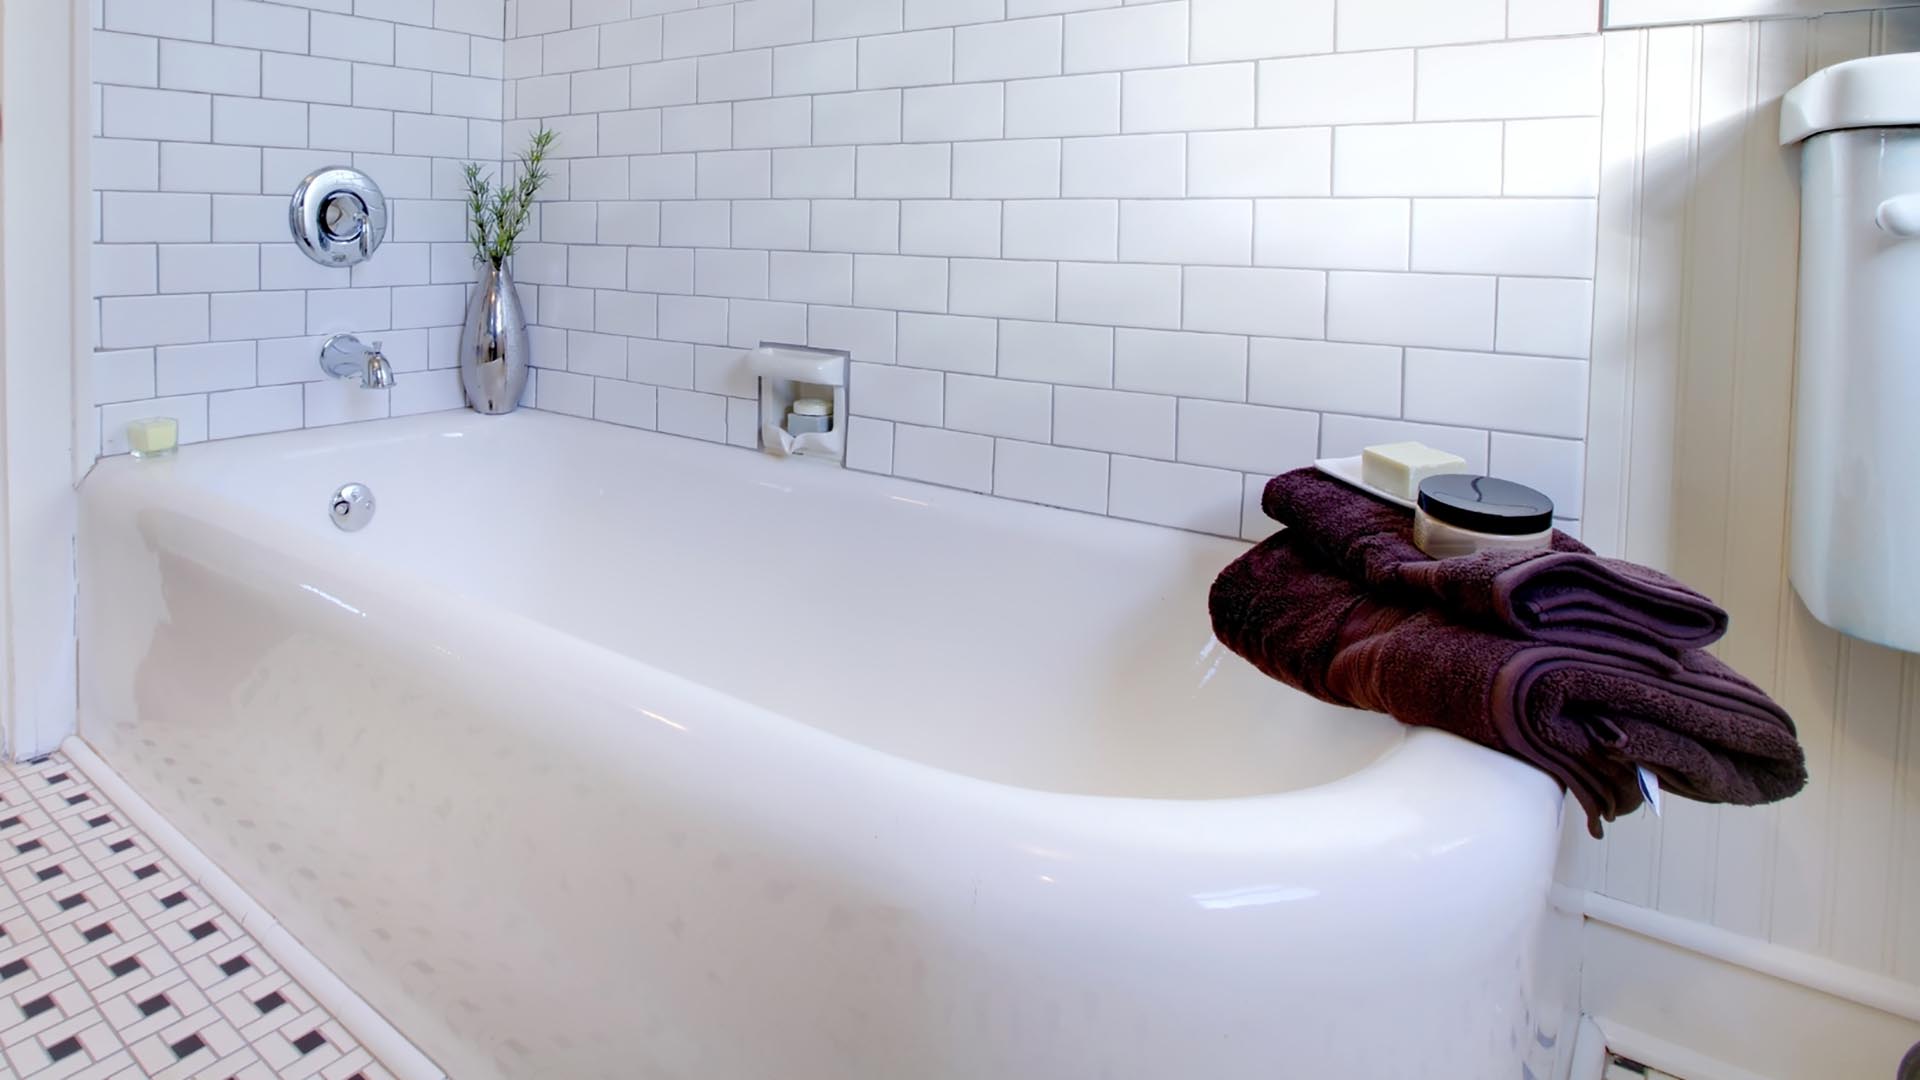 How To Remove A Cast Iron Tub Today S, How To Break Cast Iron Bathtub